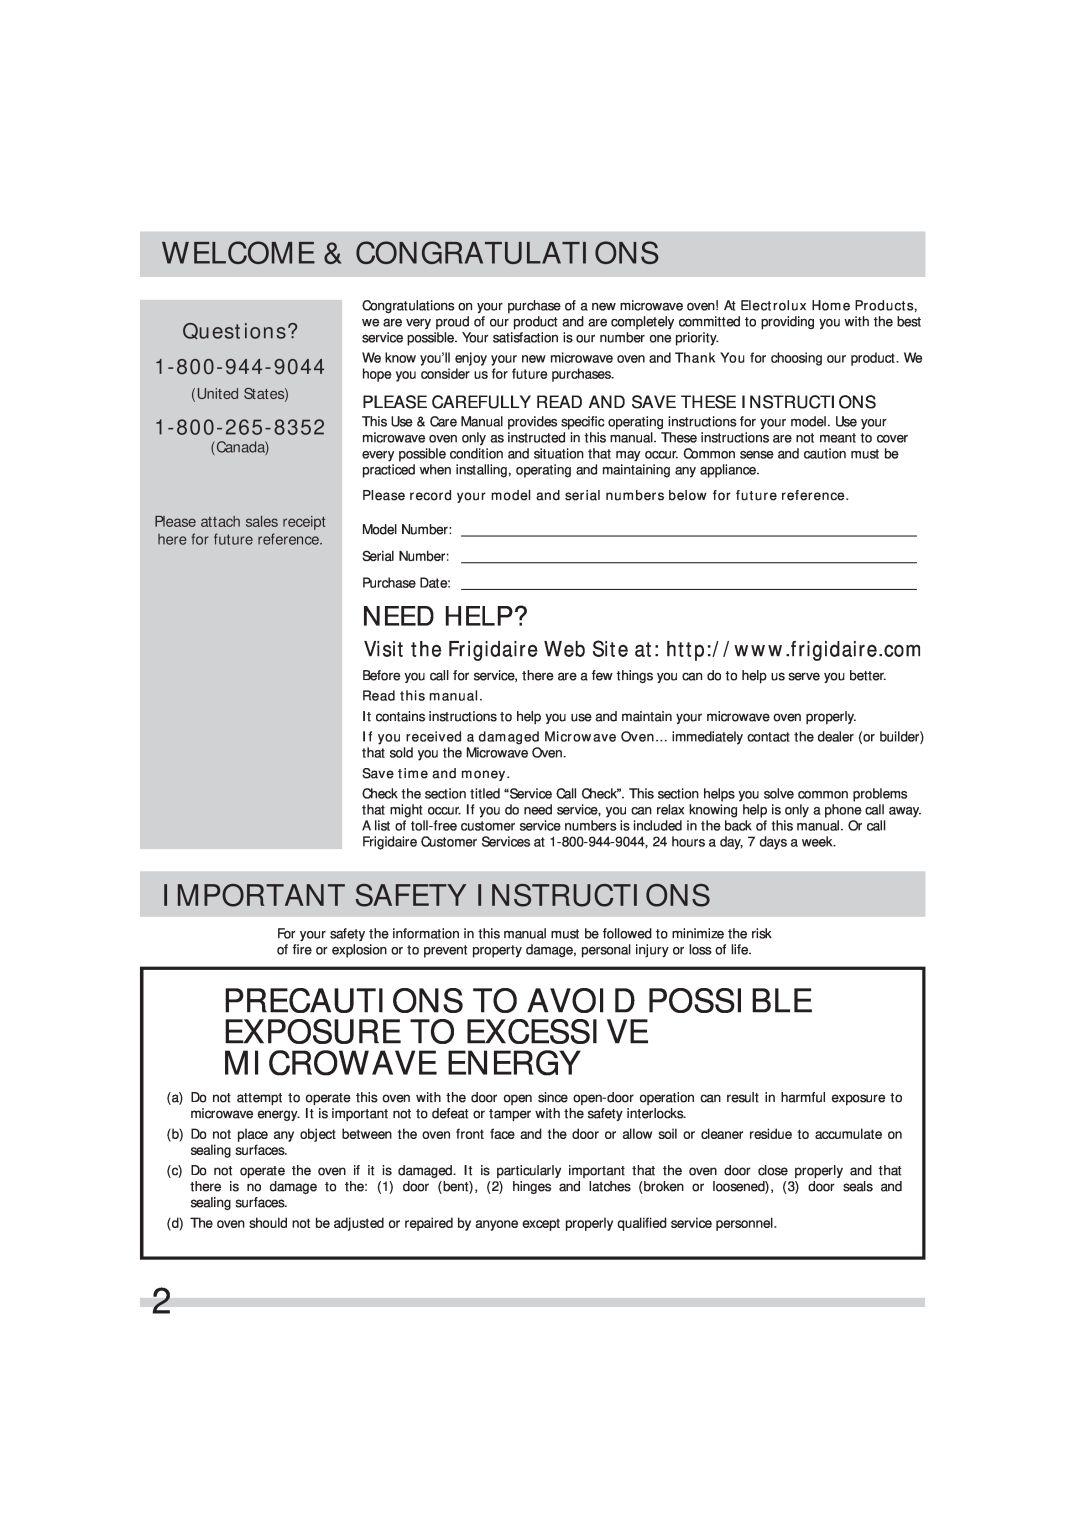 Frigidaire 316495054 Welcome & Congratulations, Important Safety Instructions, Questions?, Need Help?, Read this manual 